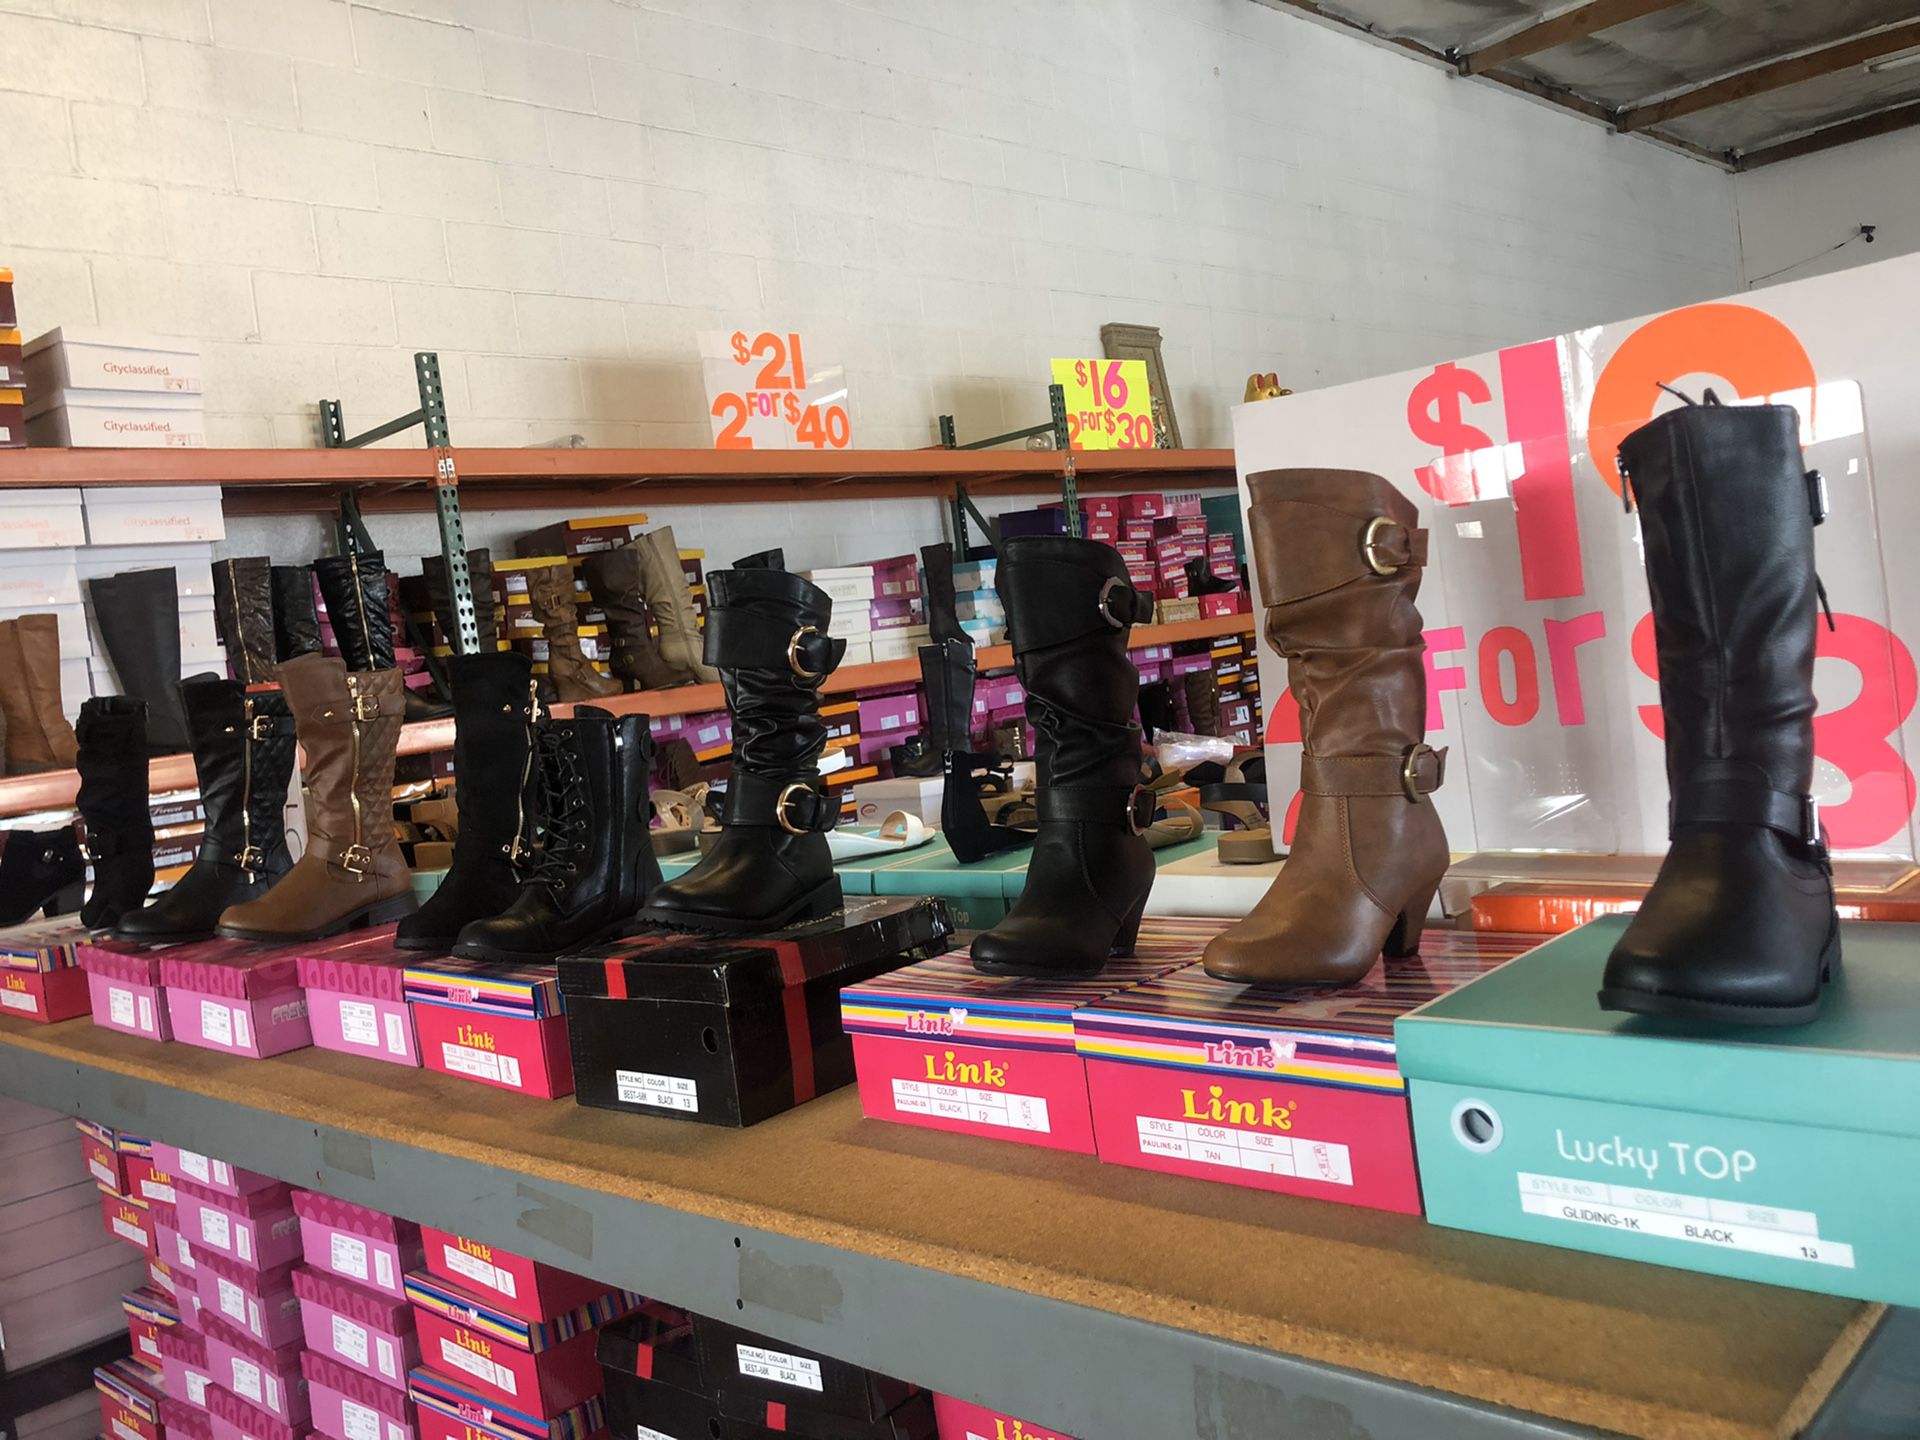 All girls boots 2 pairs for $35